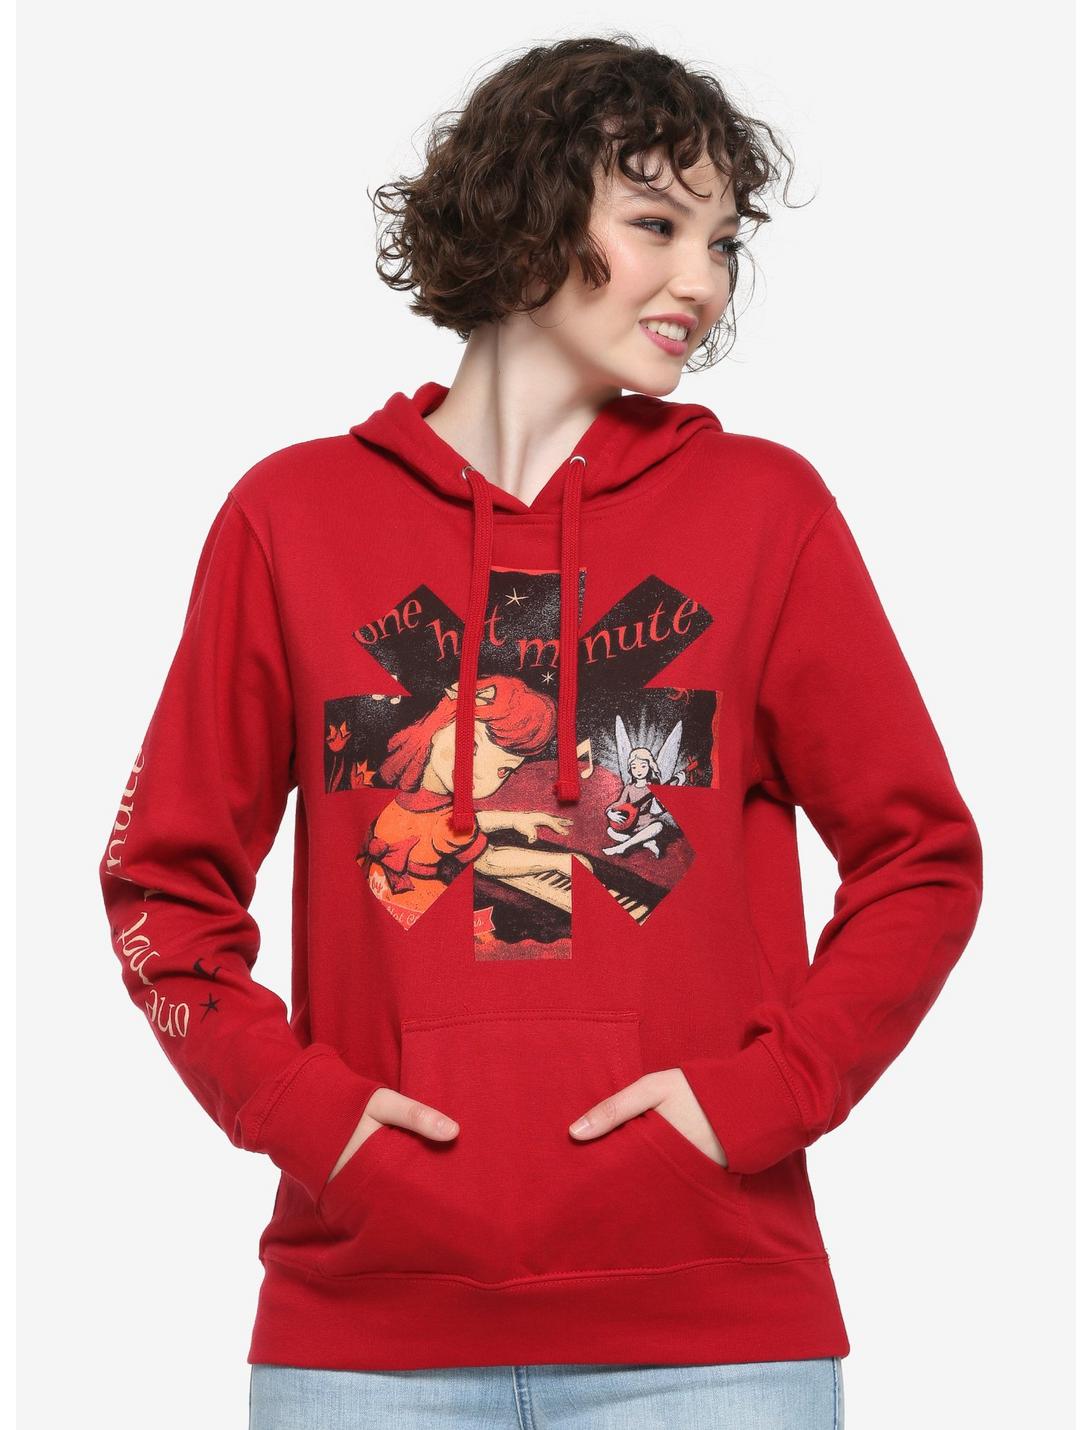 Red Hot Chili Peppers One Hot Minute Girls Hoodie, RED, hi-res